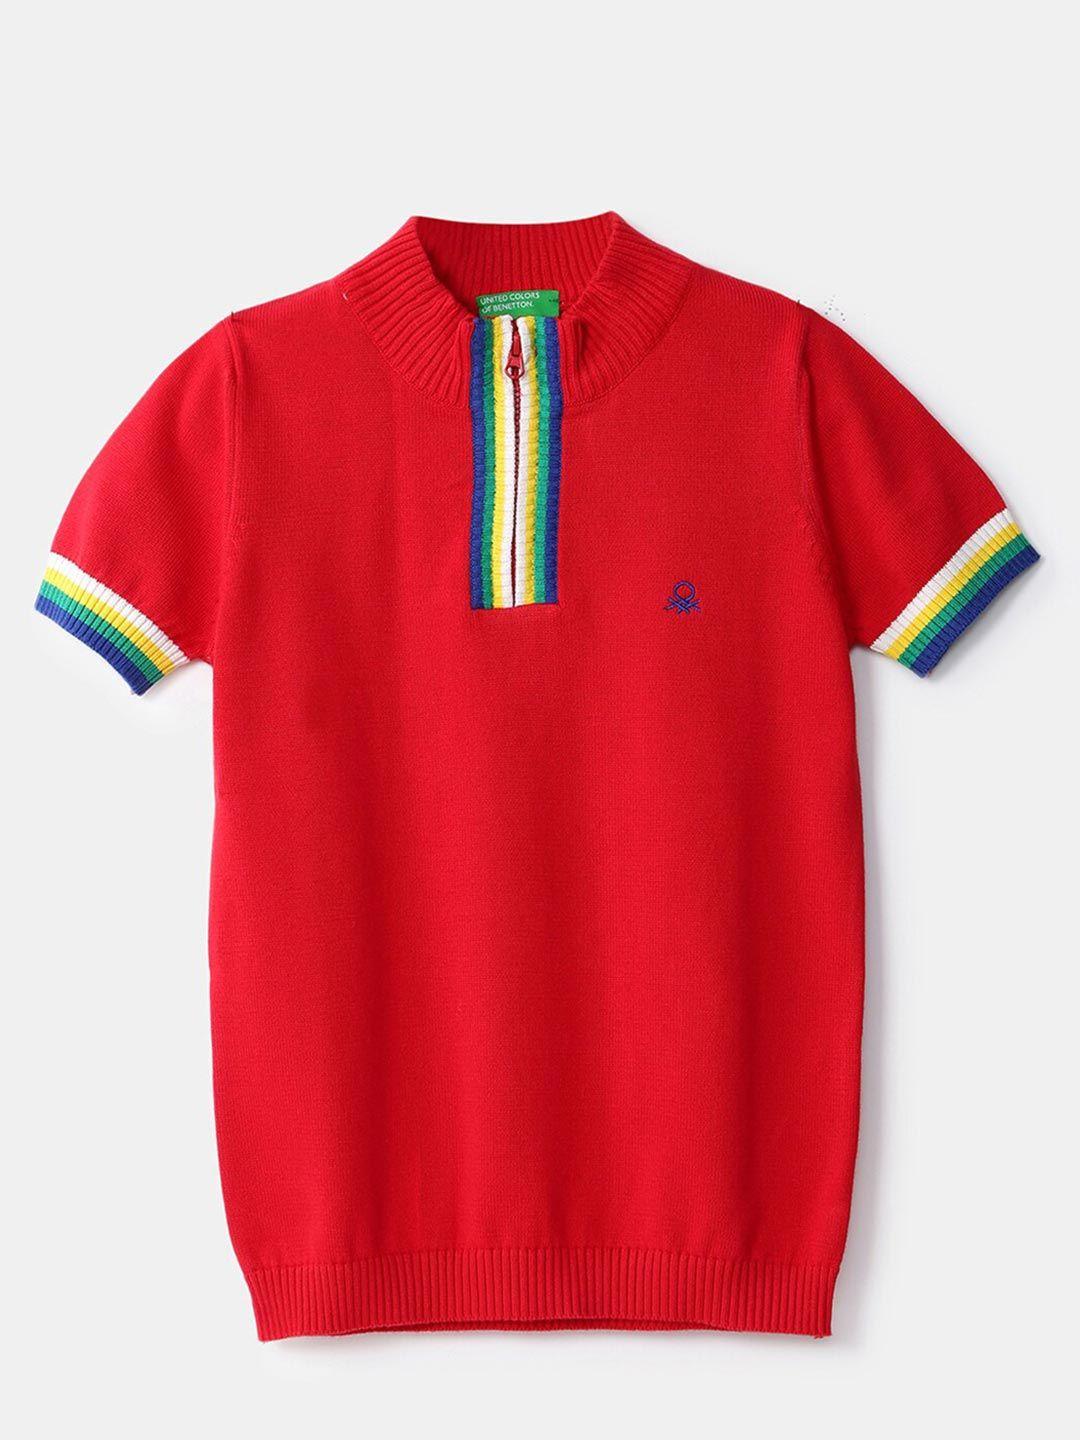 united-colors-of-benetton-boys-red-short-sleeve-sweater